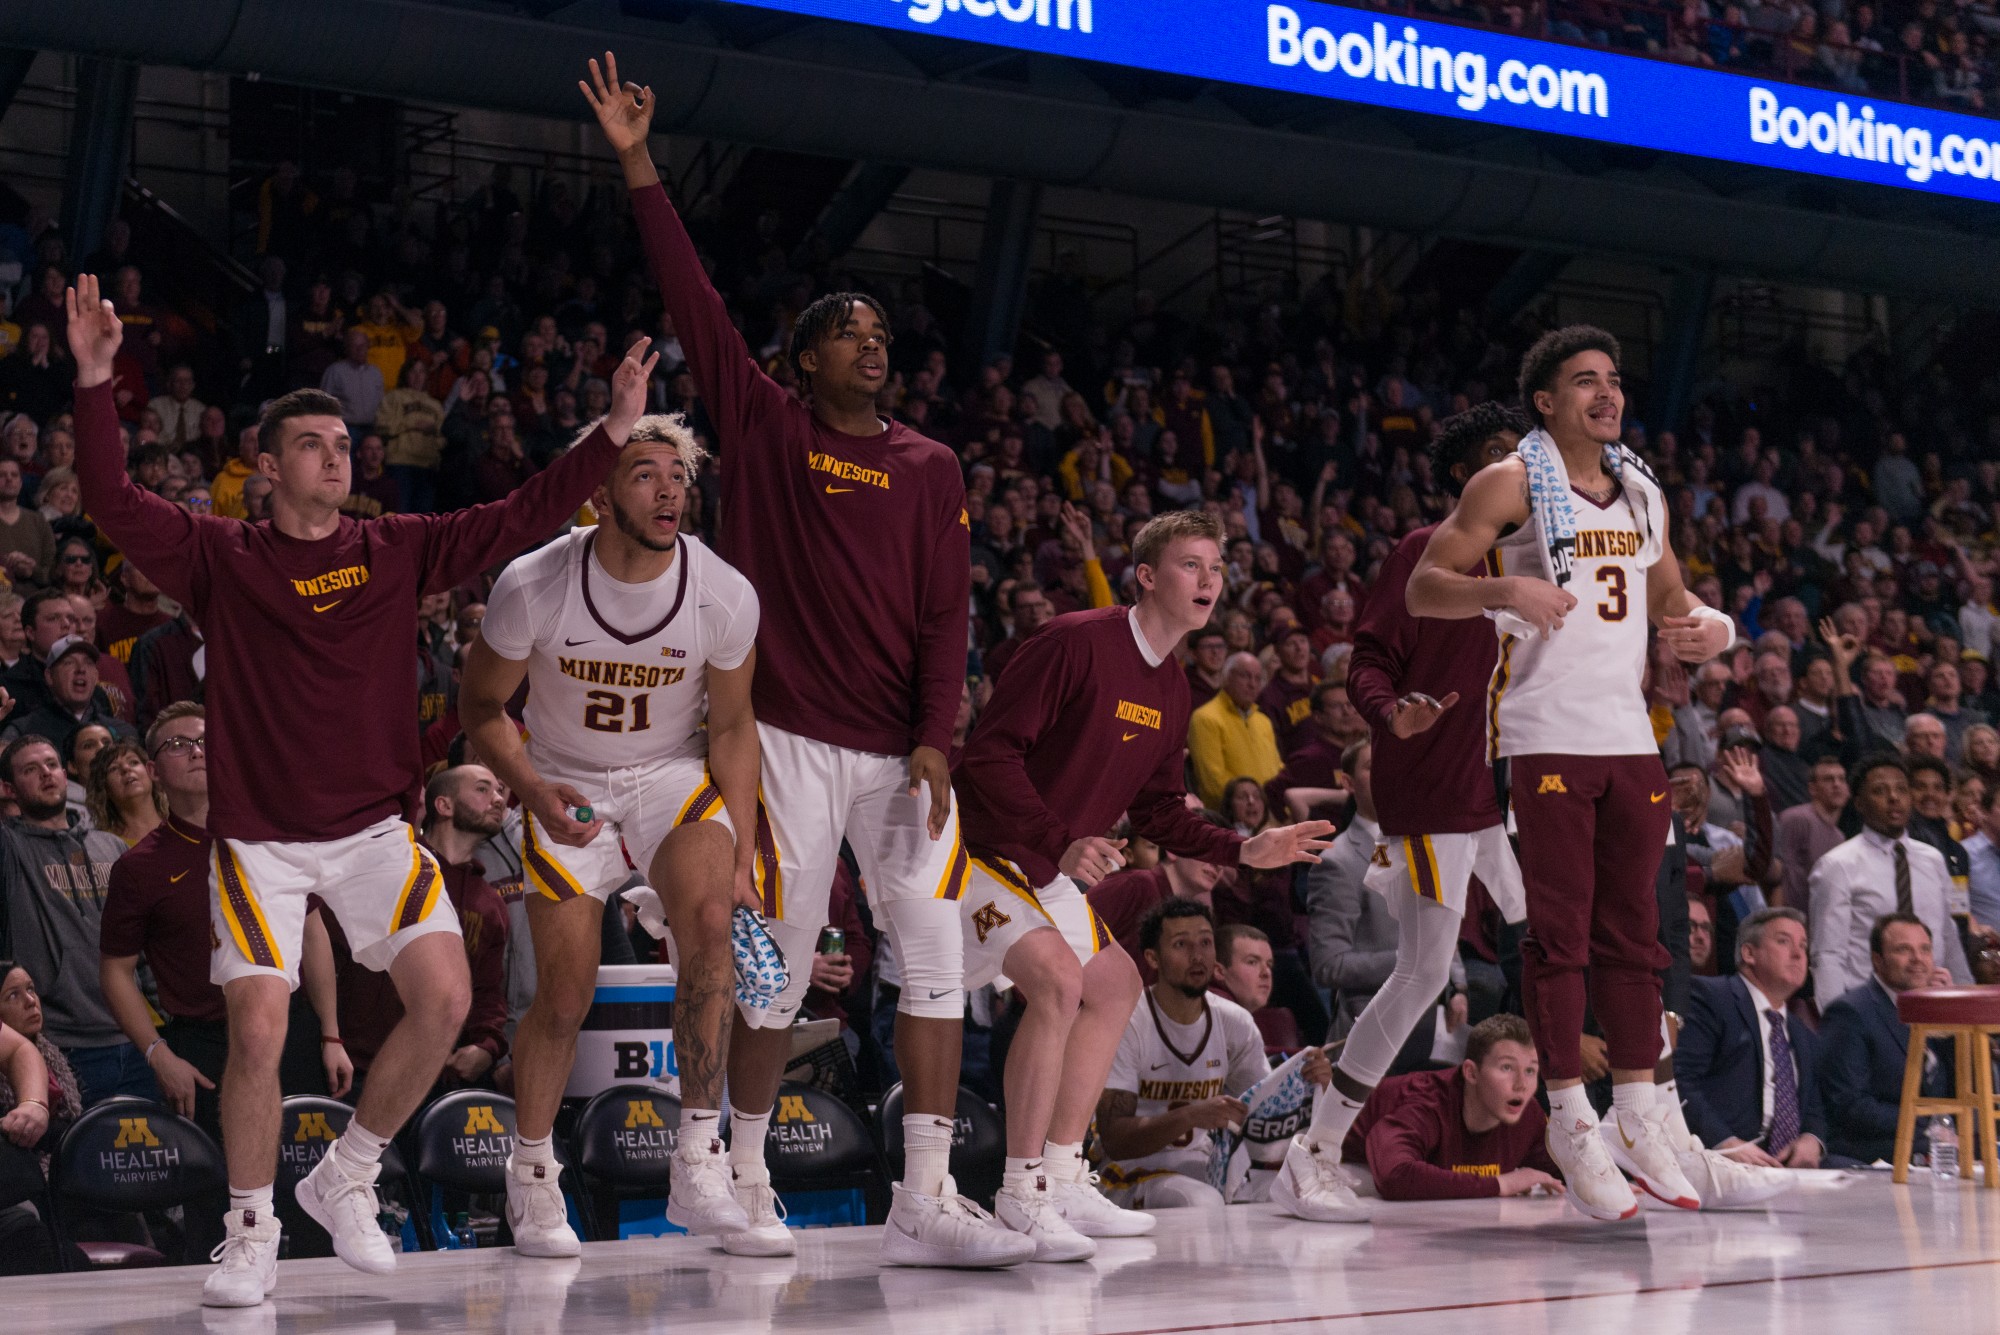 Players on the Gophers bench observe those on the court at Williams Arena on Wednesday, Jan. 15.  Minnesota defeated the Penn State Nittany Lions 75-69. (Kamaan Richards / Minnesota Daily)